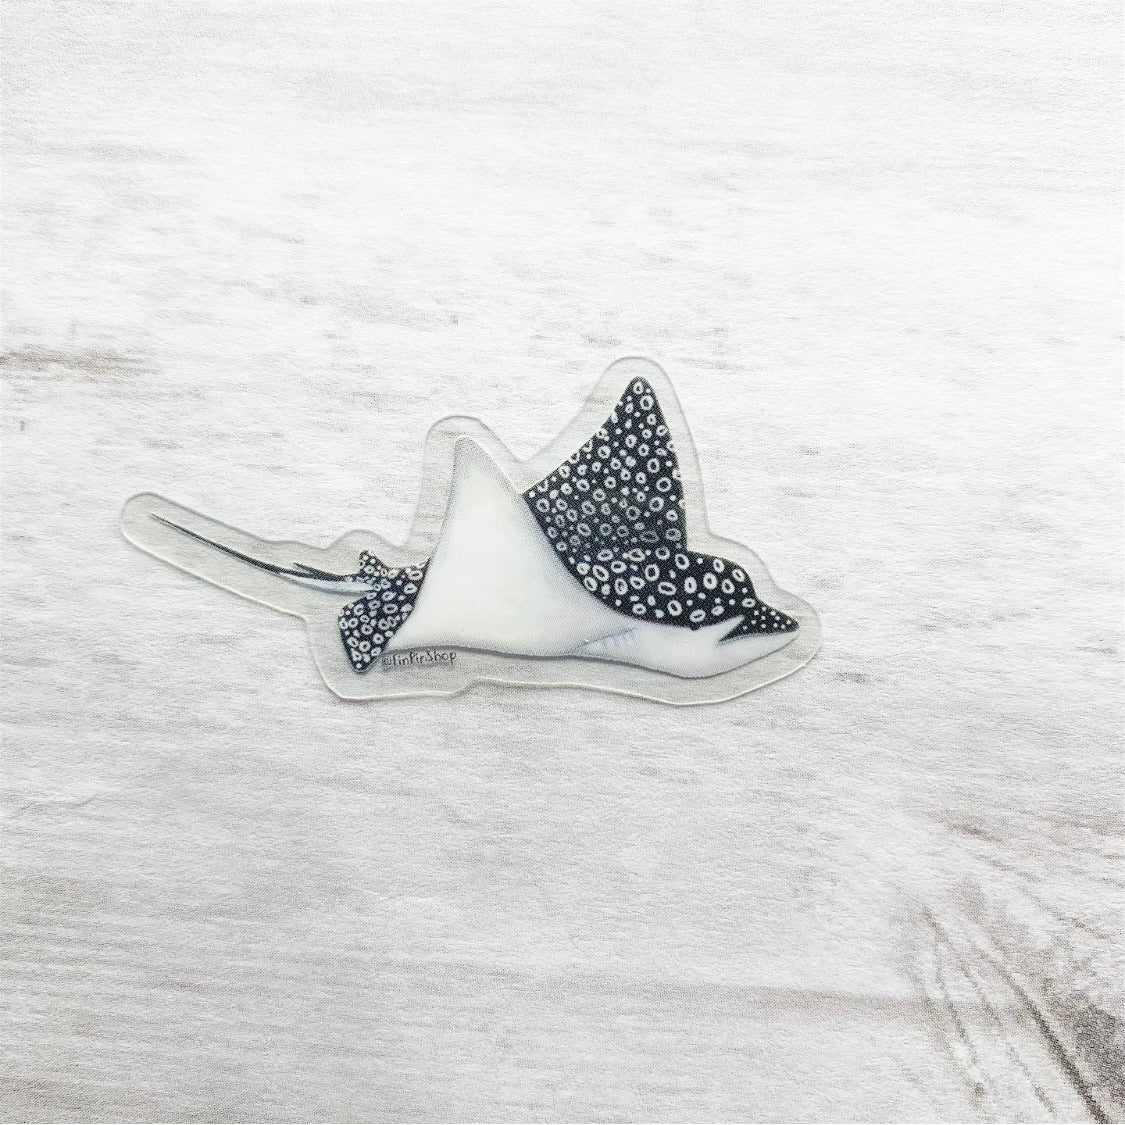 spotted eagle ray sticker